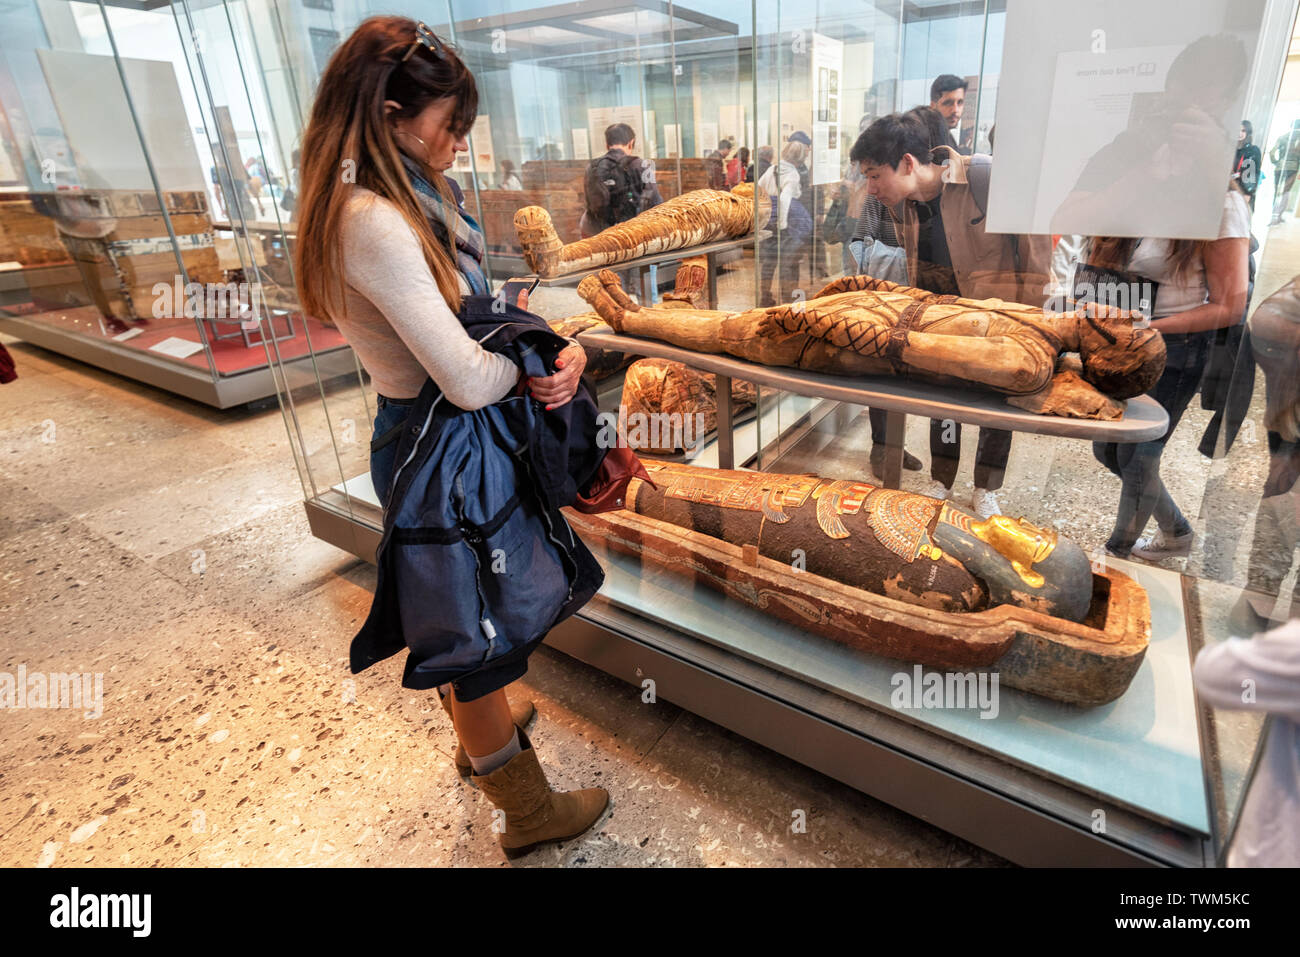 London, United Kingdom - May 13, 2019: The British Museum, London. Hall of Ancient Egypt, tourist admiring ancient mummies exhibition .  Stock Photo